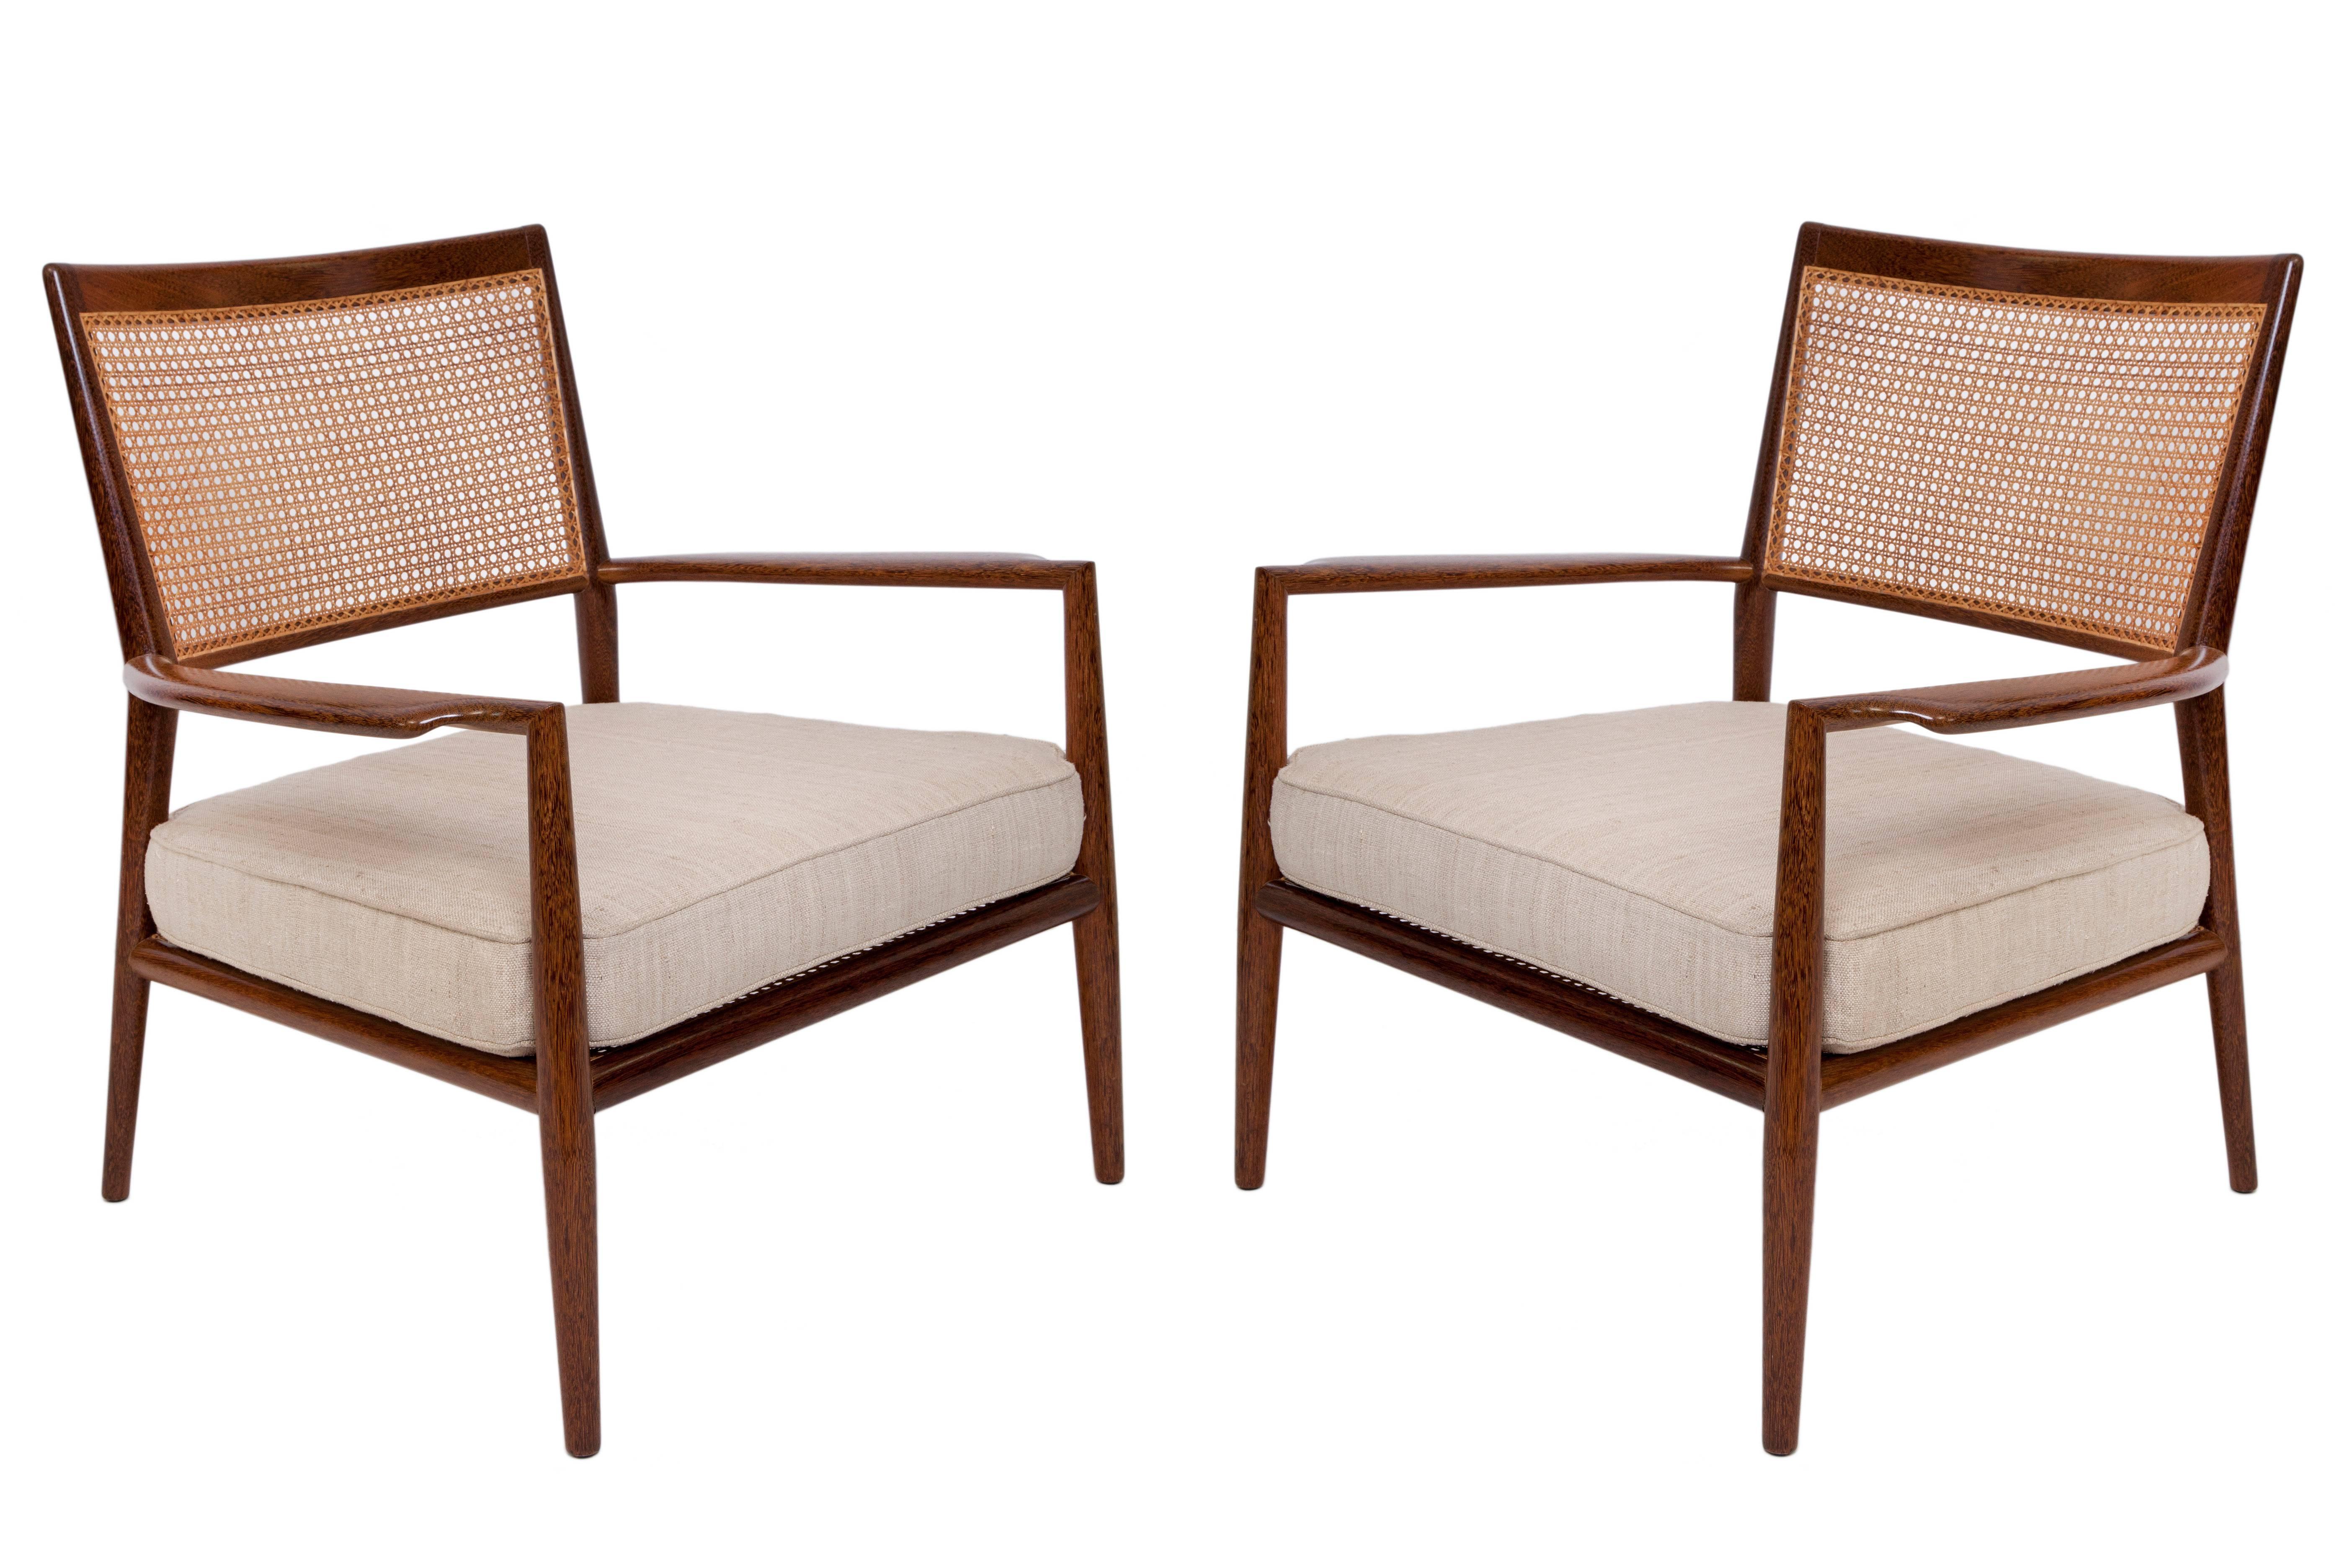 A pair of vintage armchairs, by designer Carlos Milan, produced circa 1960s, framed in sucupira wood with woven cane seat and back, each with upholstered cushion seats in beige linen, on tapered legs. Good condition, with age appropriate wear